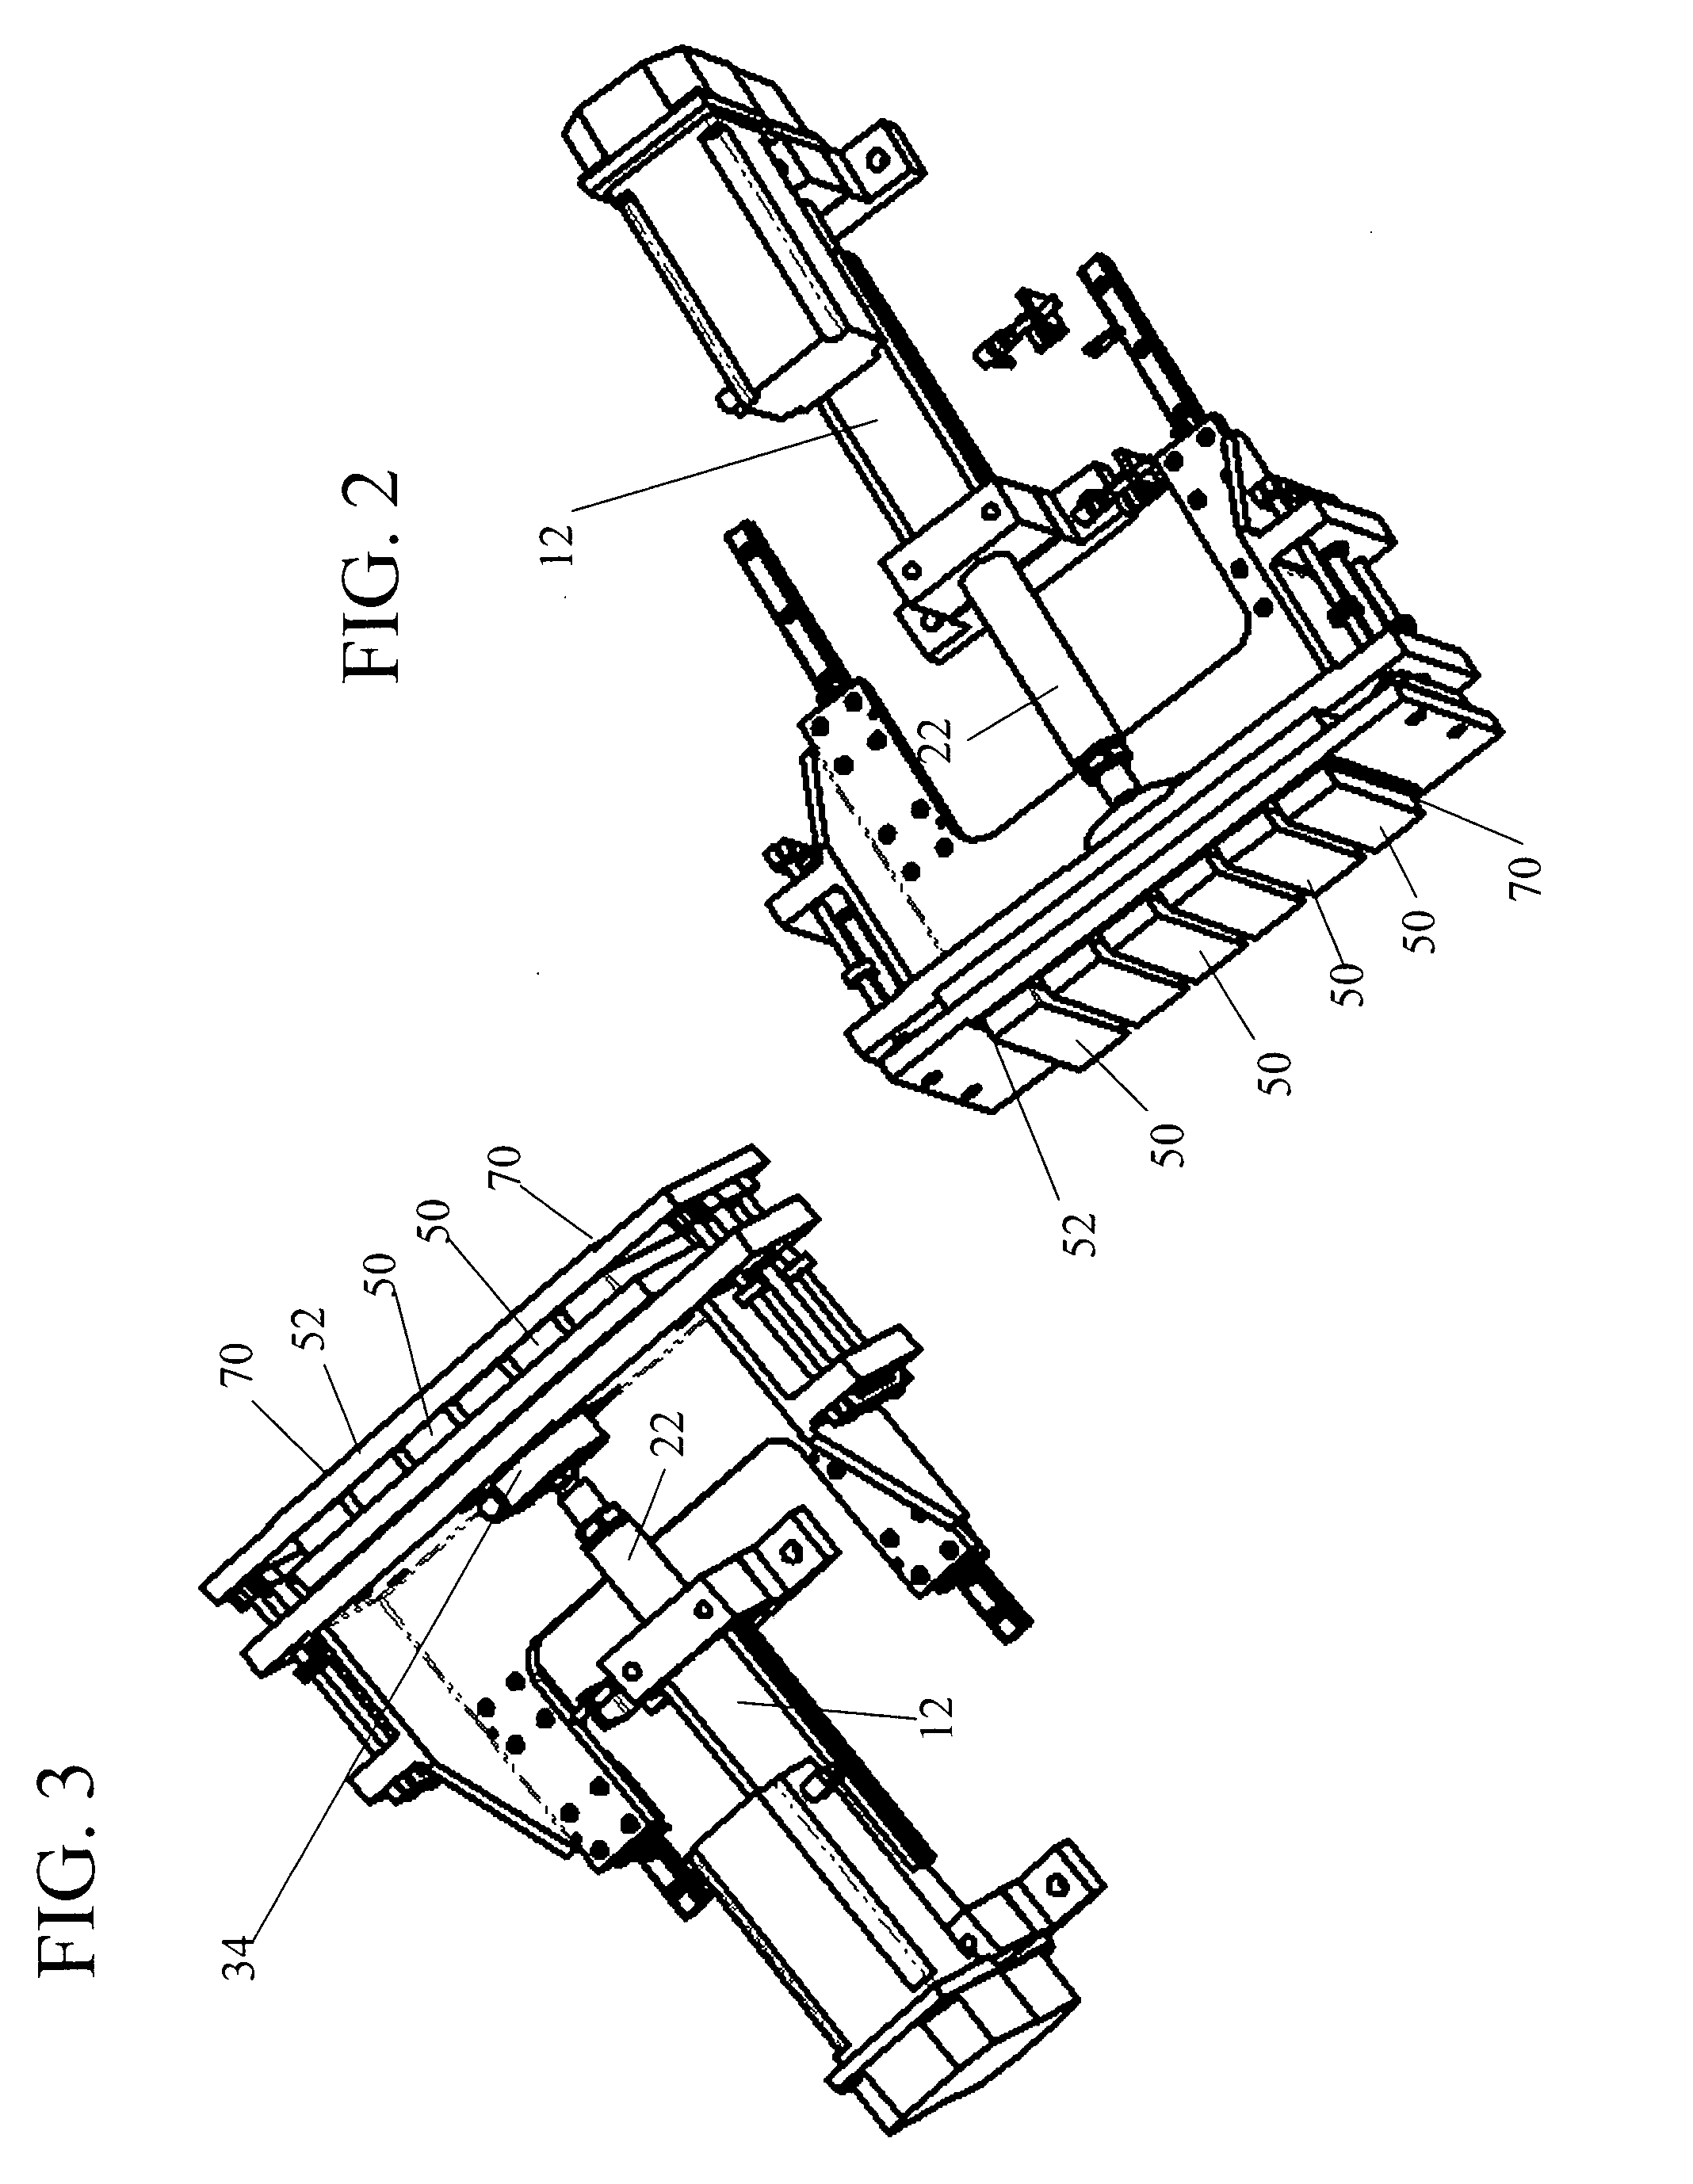 Load cell deflasher assembly and method